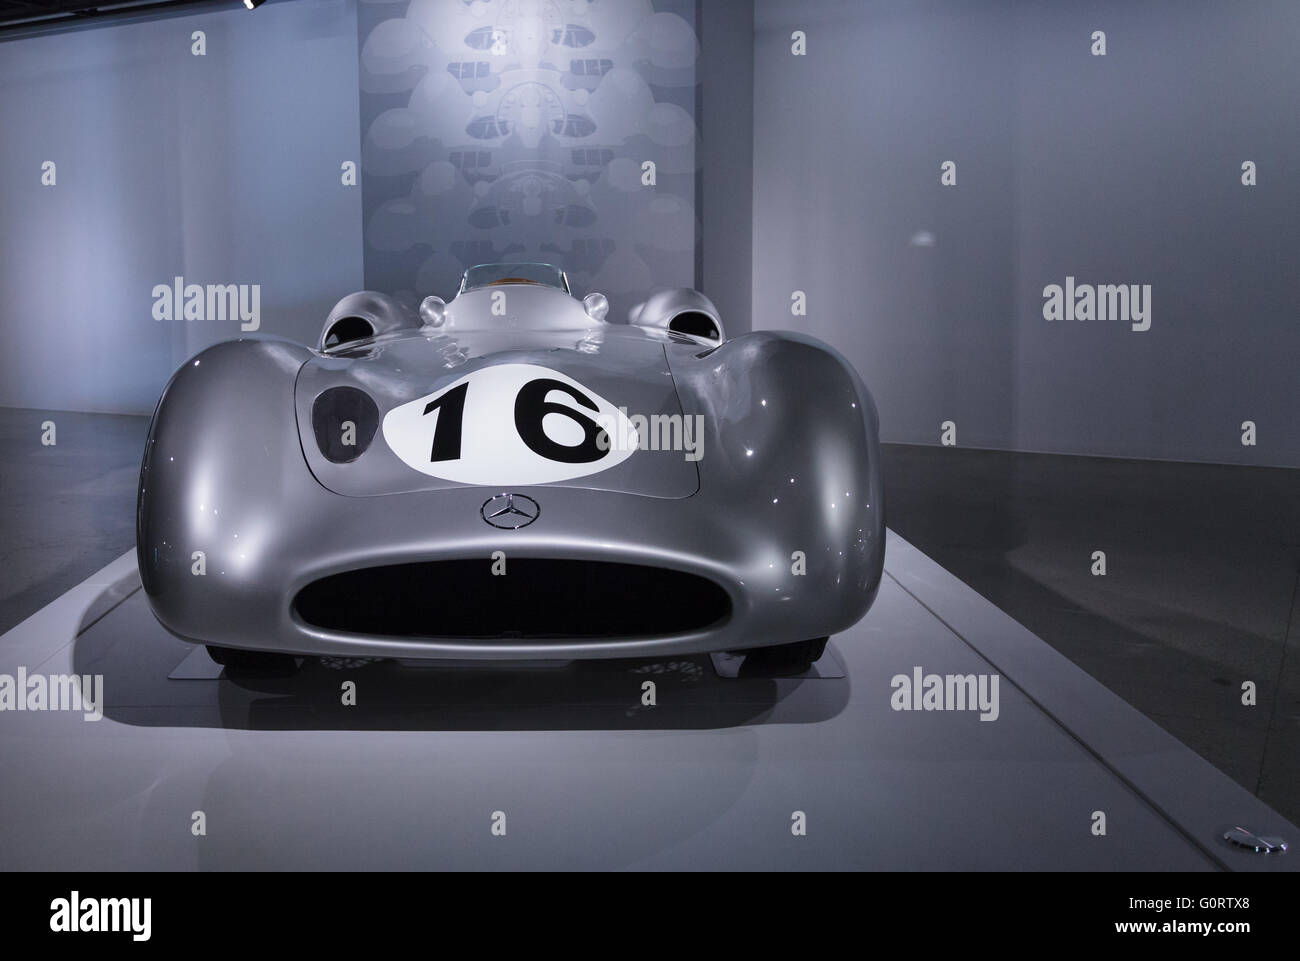 1954 Mercedes Benz W196 dalla collezione dell'Indianapolis Motor Speedway Hall of Fame Museum Foto Stock